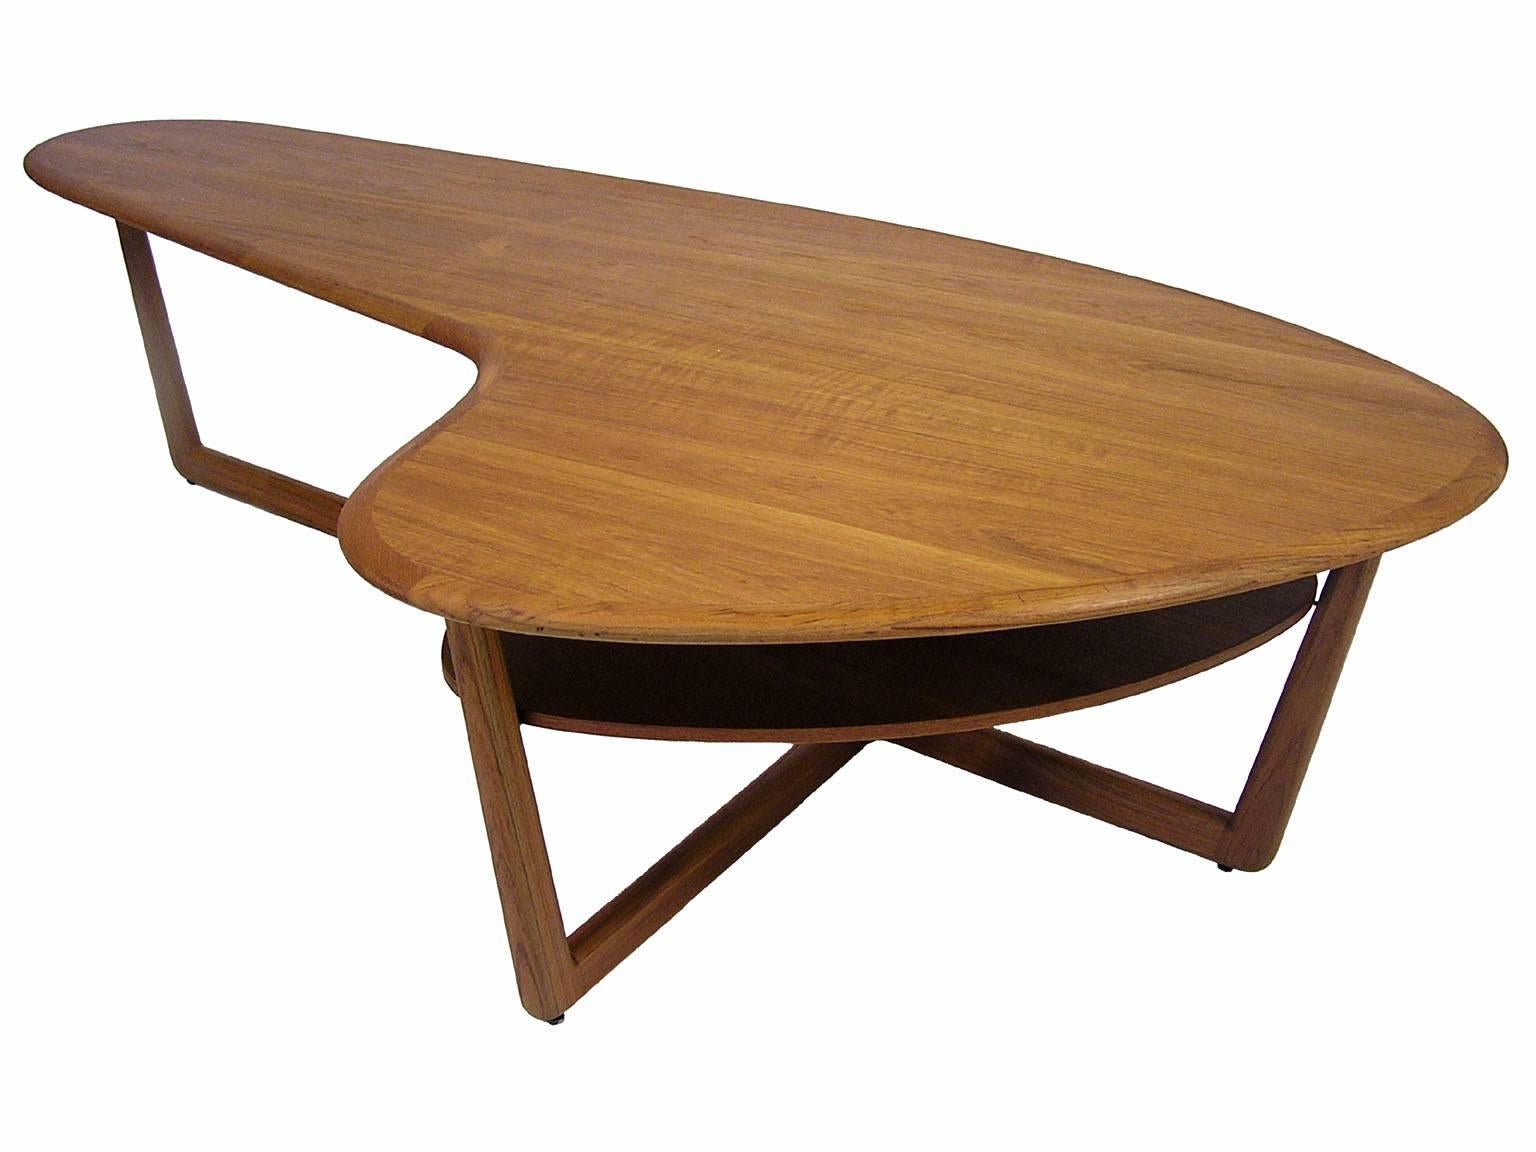 An amazing kidney shaped teak coffee table from the 1960s Mid-Century Modern era by Interior form furniture limited of Canada. Gorgeous craftsmanship throughout with a solid tapered edge, T-bar style base and biomorphic shaped lower shelf. Table has